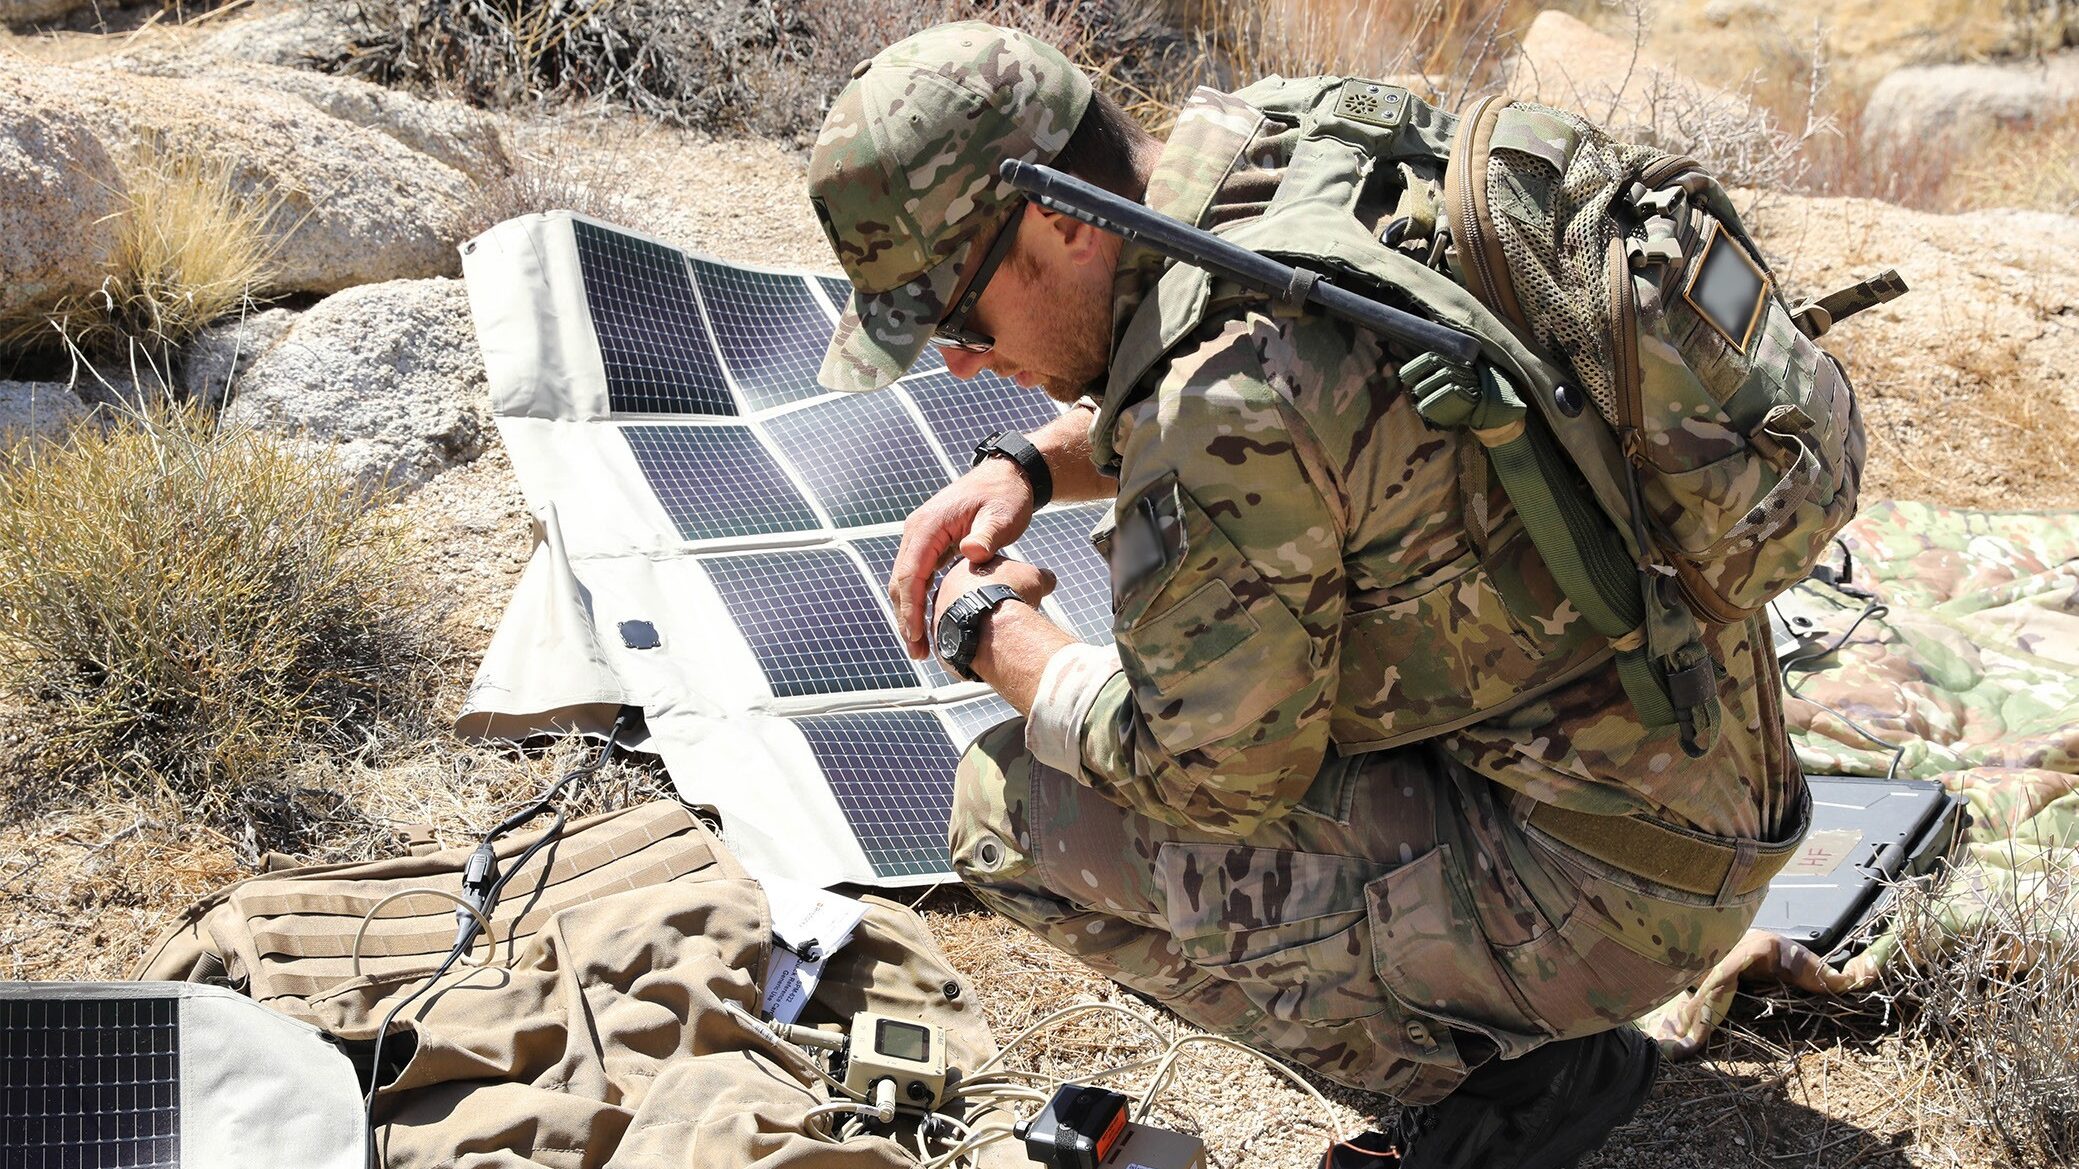 As Army begins electrification push, C5ISR office aims to smooth bumps in the road - Breaking Defense